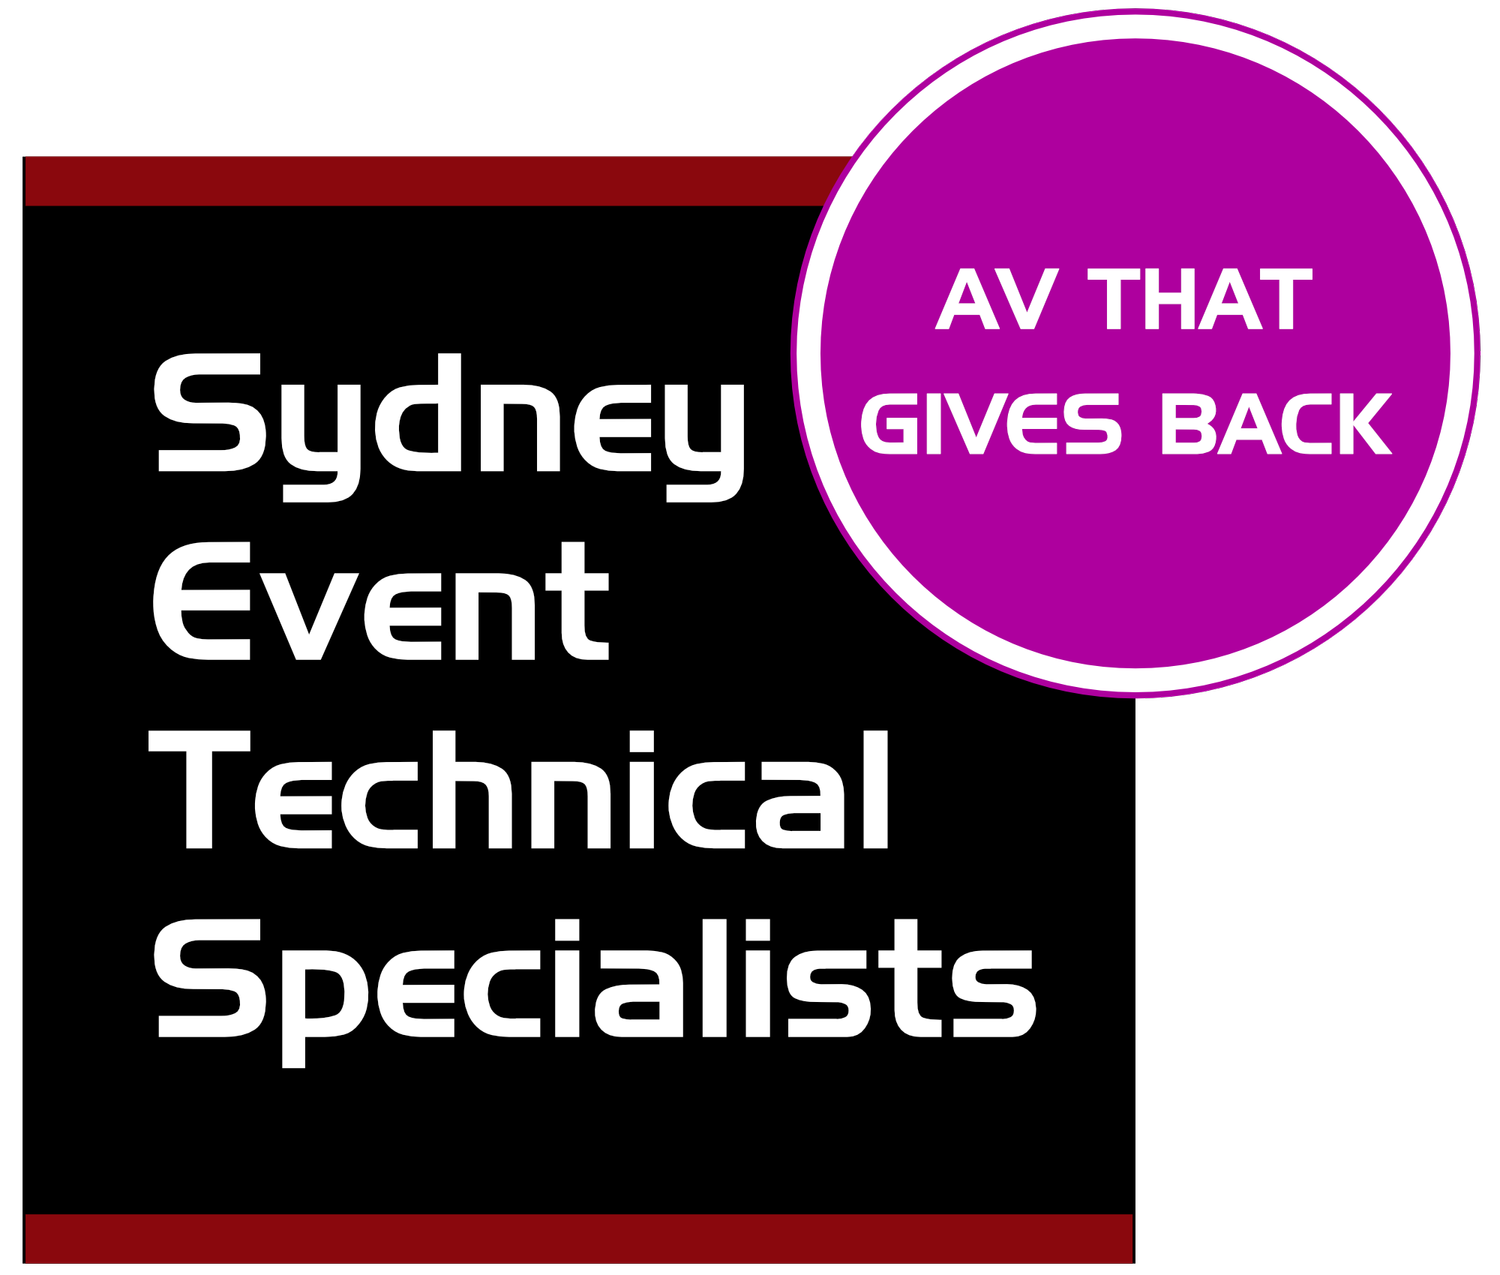 Sydney Event Technical Specialists